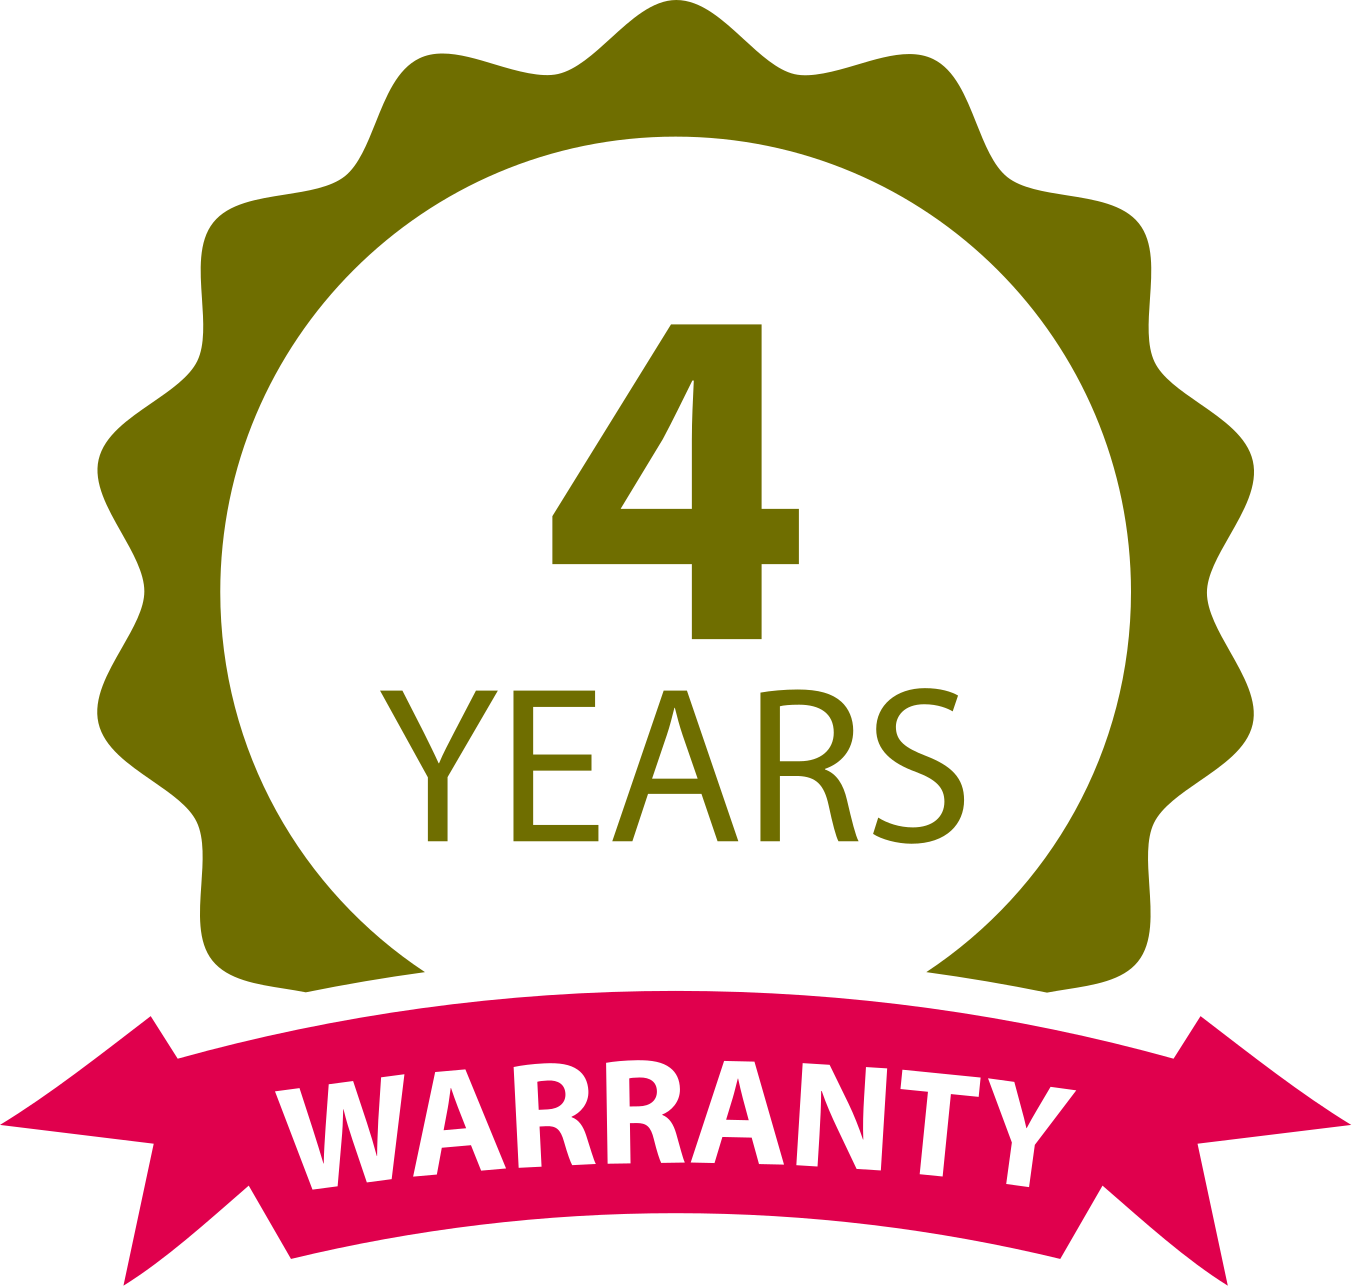 Extended Warranty for TCR-S (48 months)